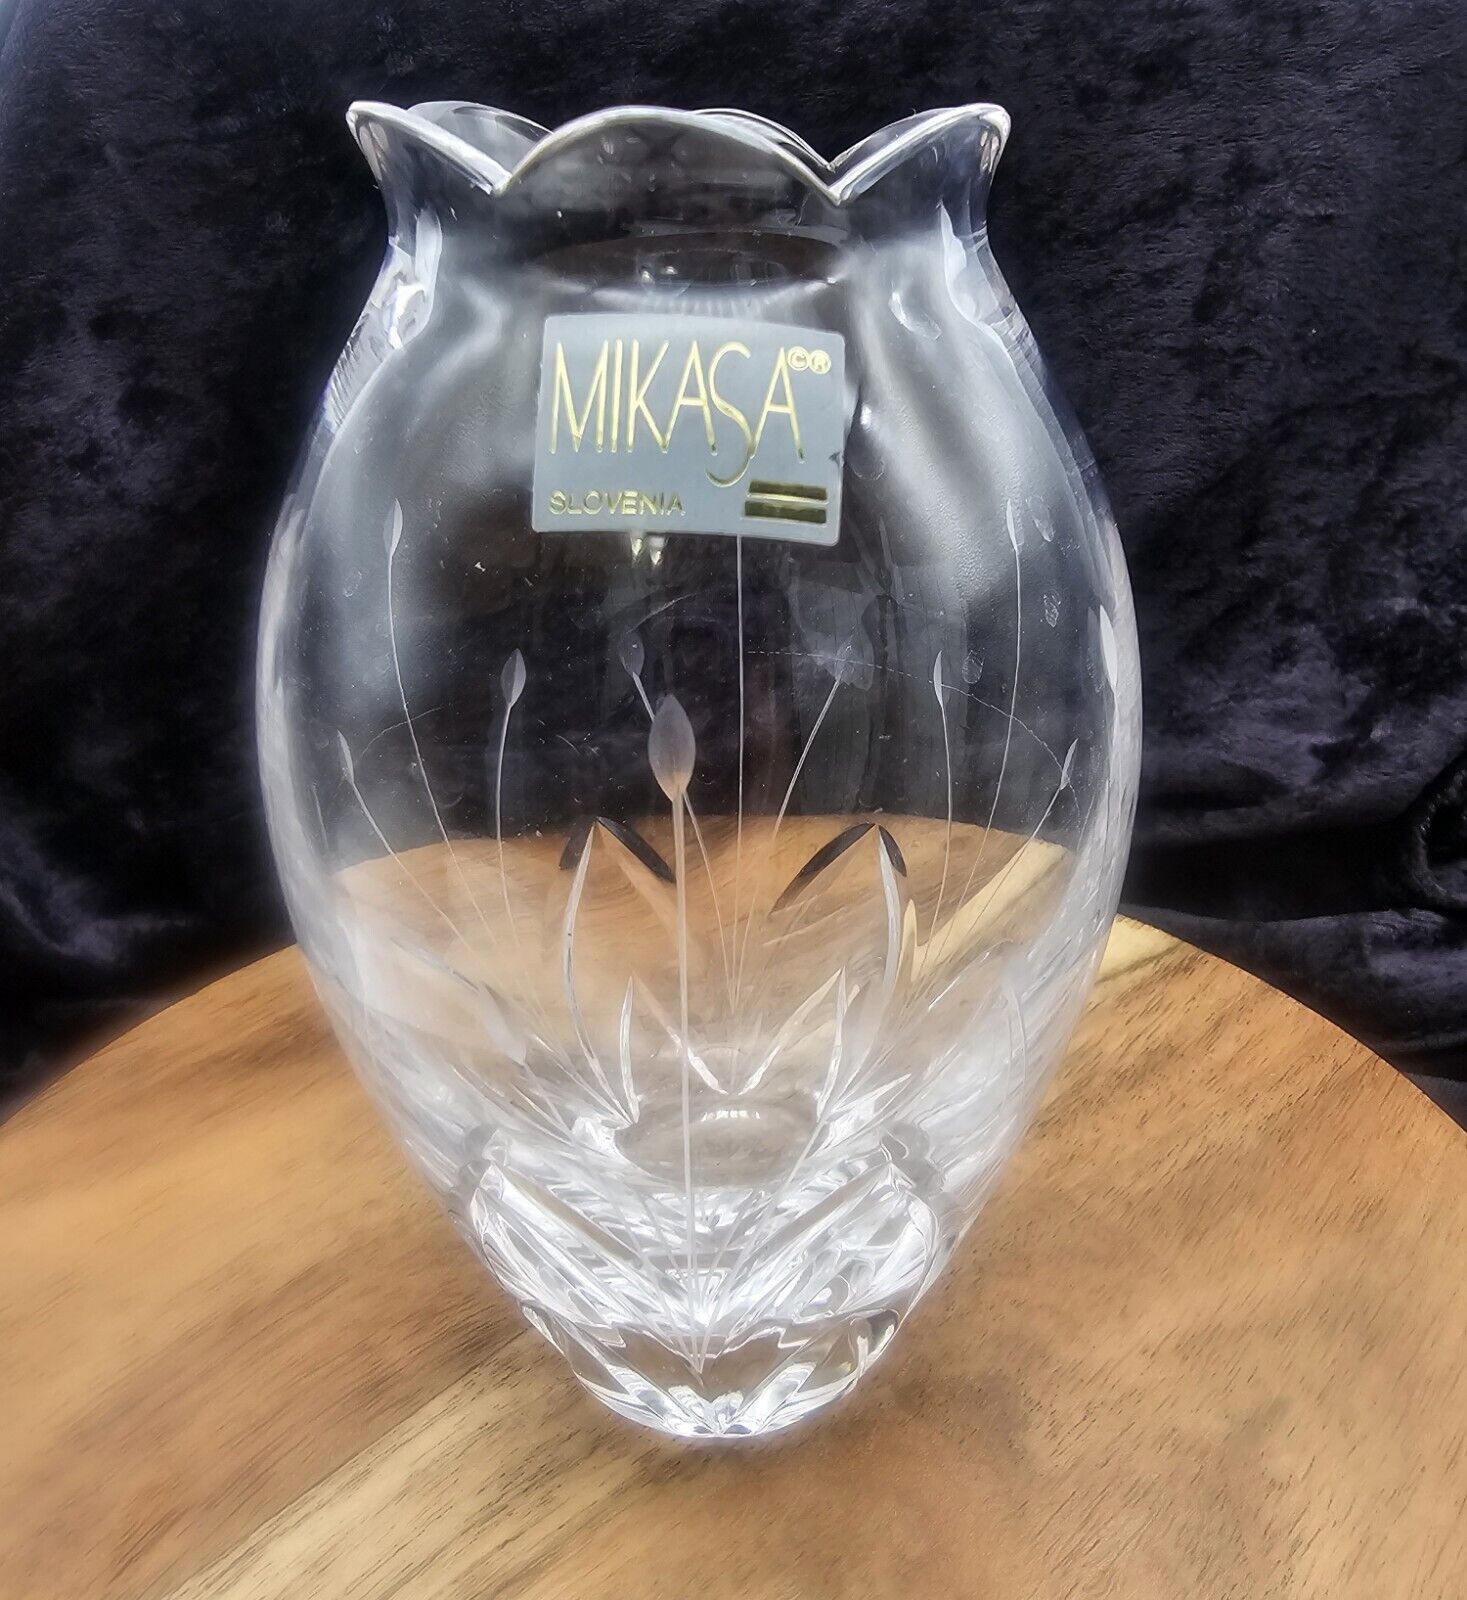  MIKASA CRYSTAL VASE Scalloped Top Etched Design 